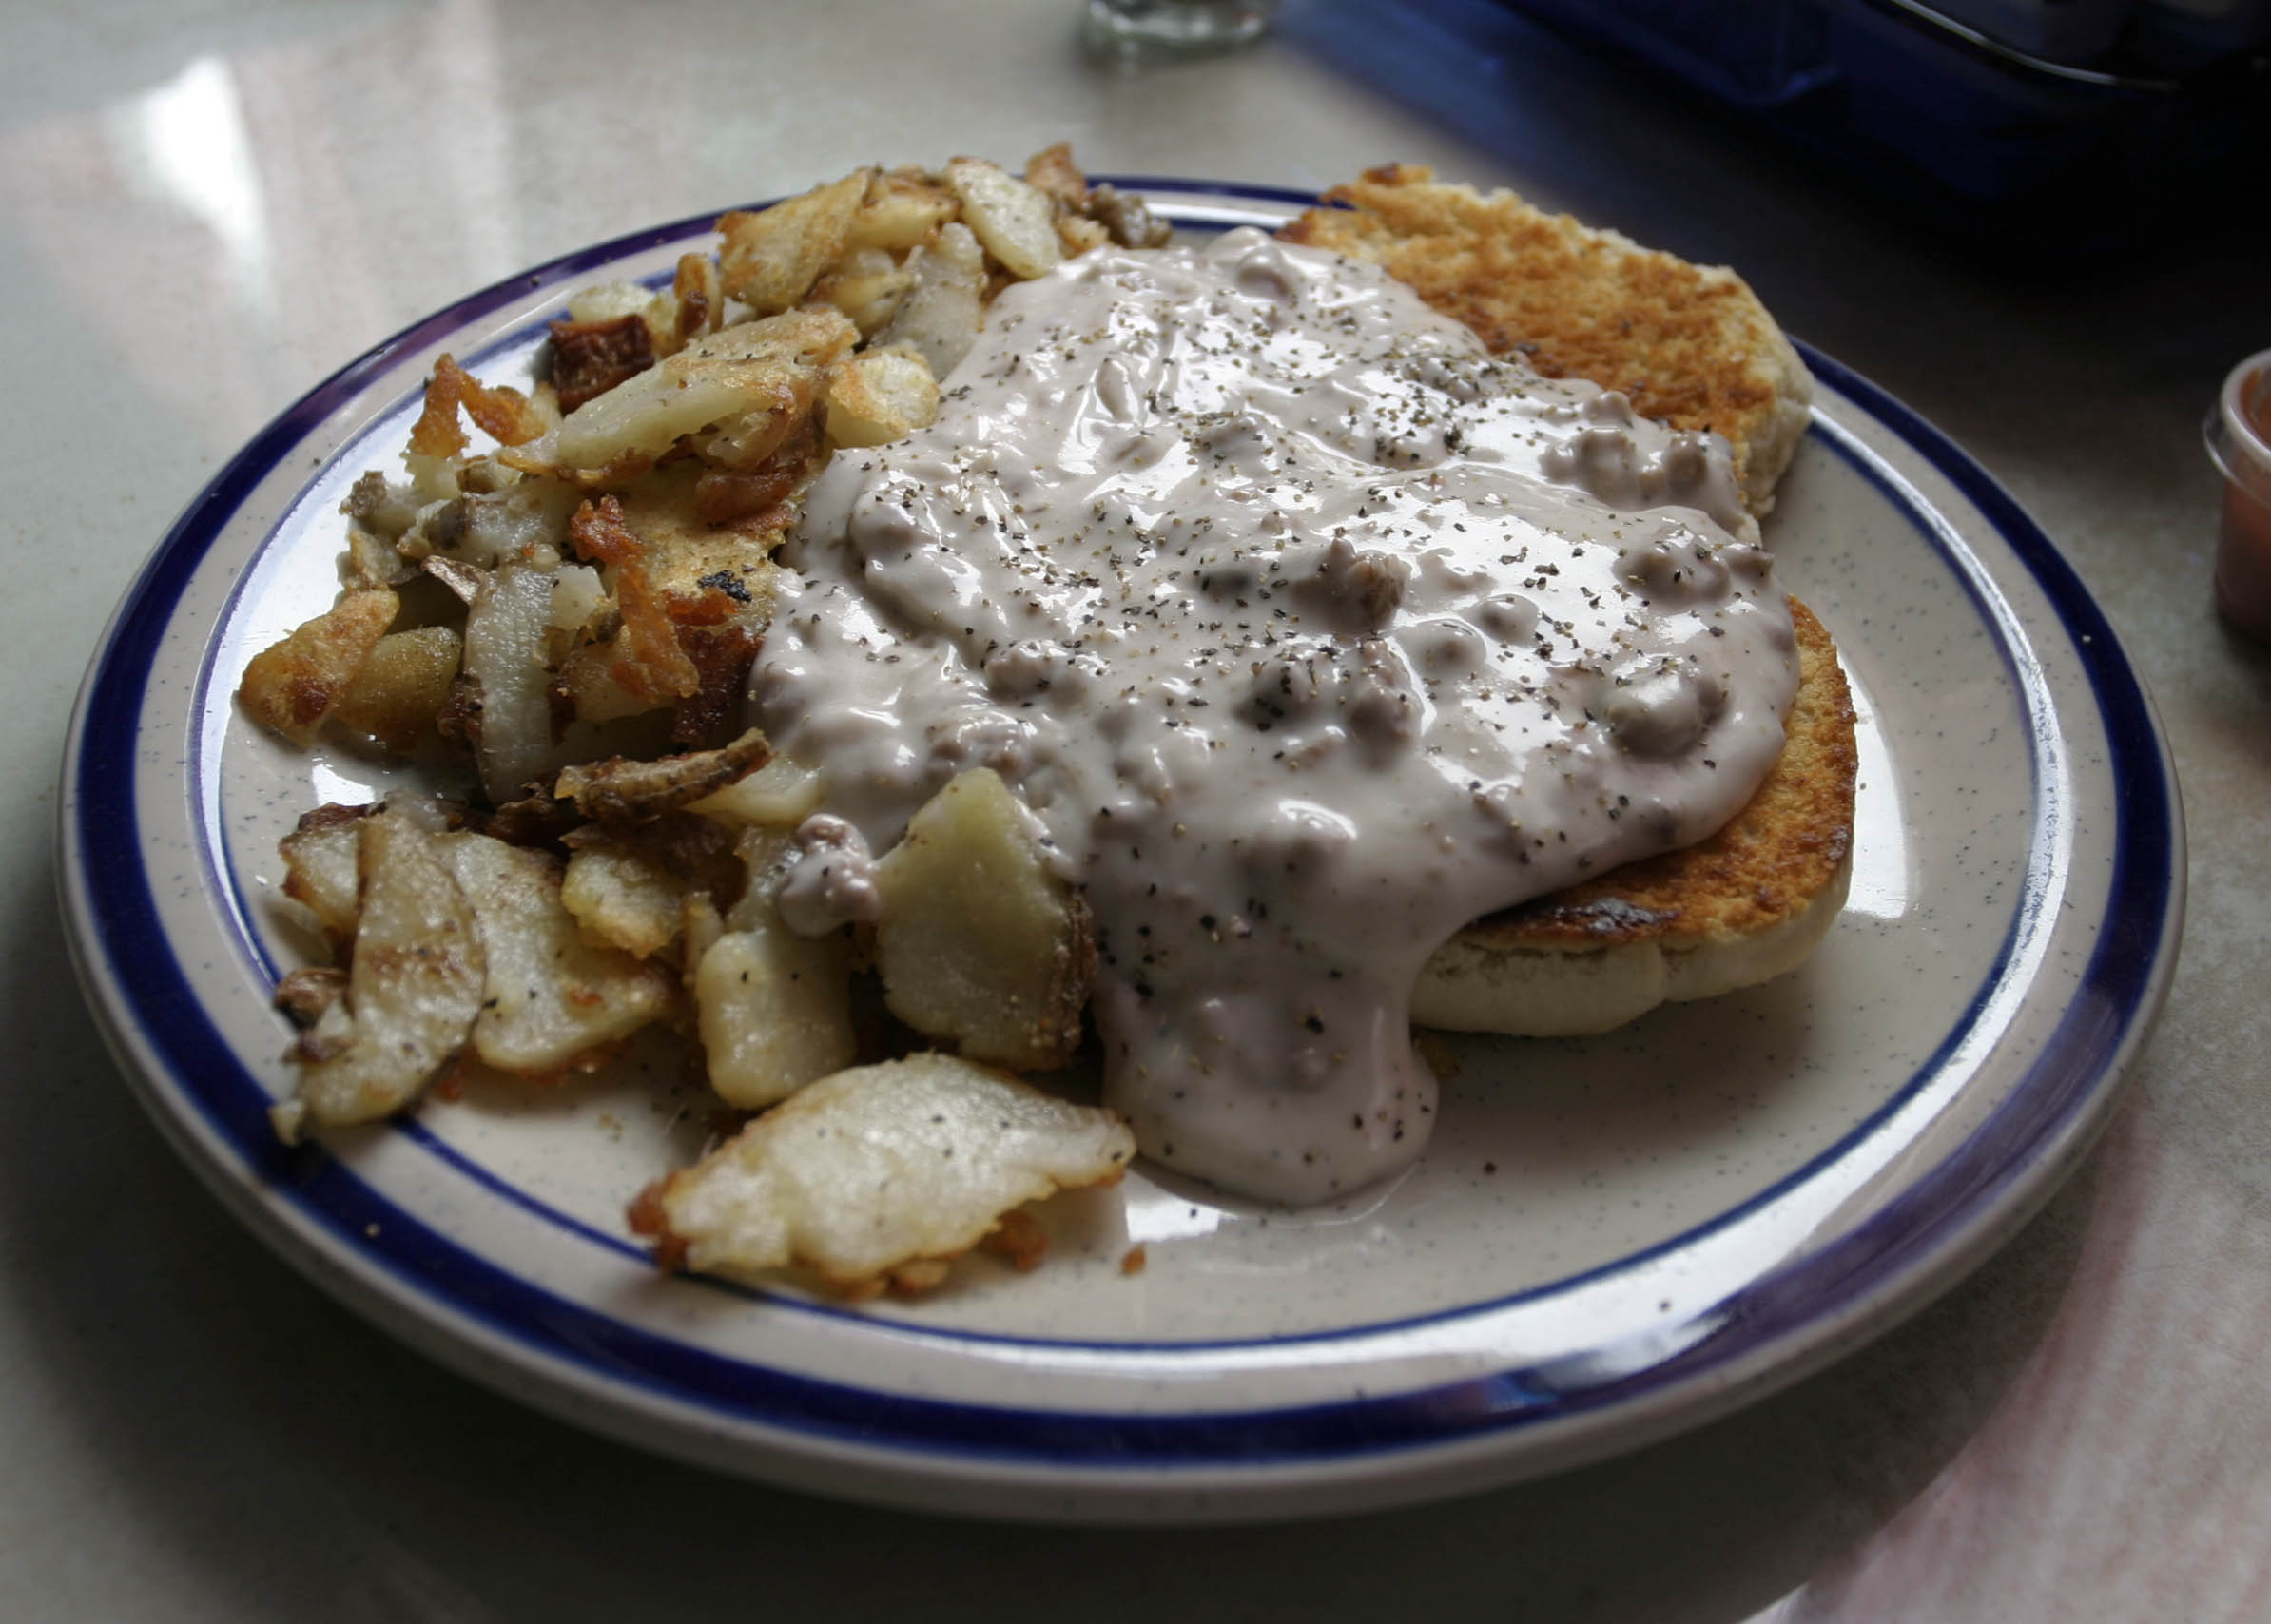 Biscuits-and-gravy.jpg